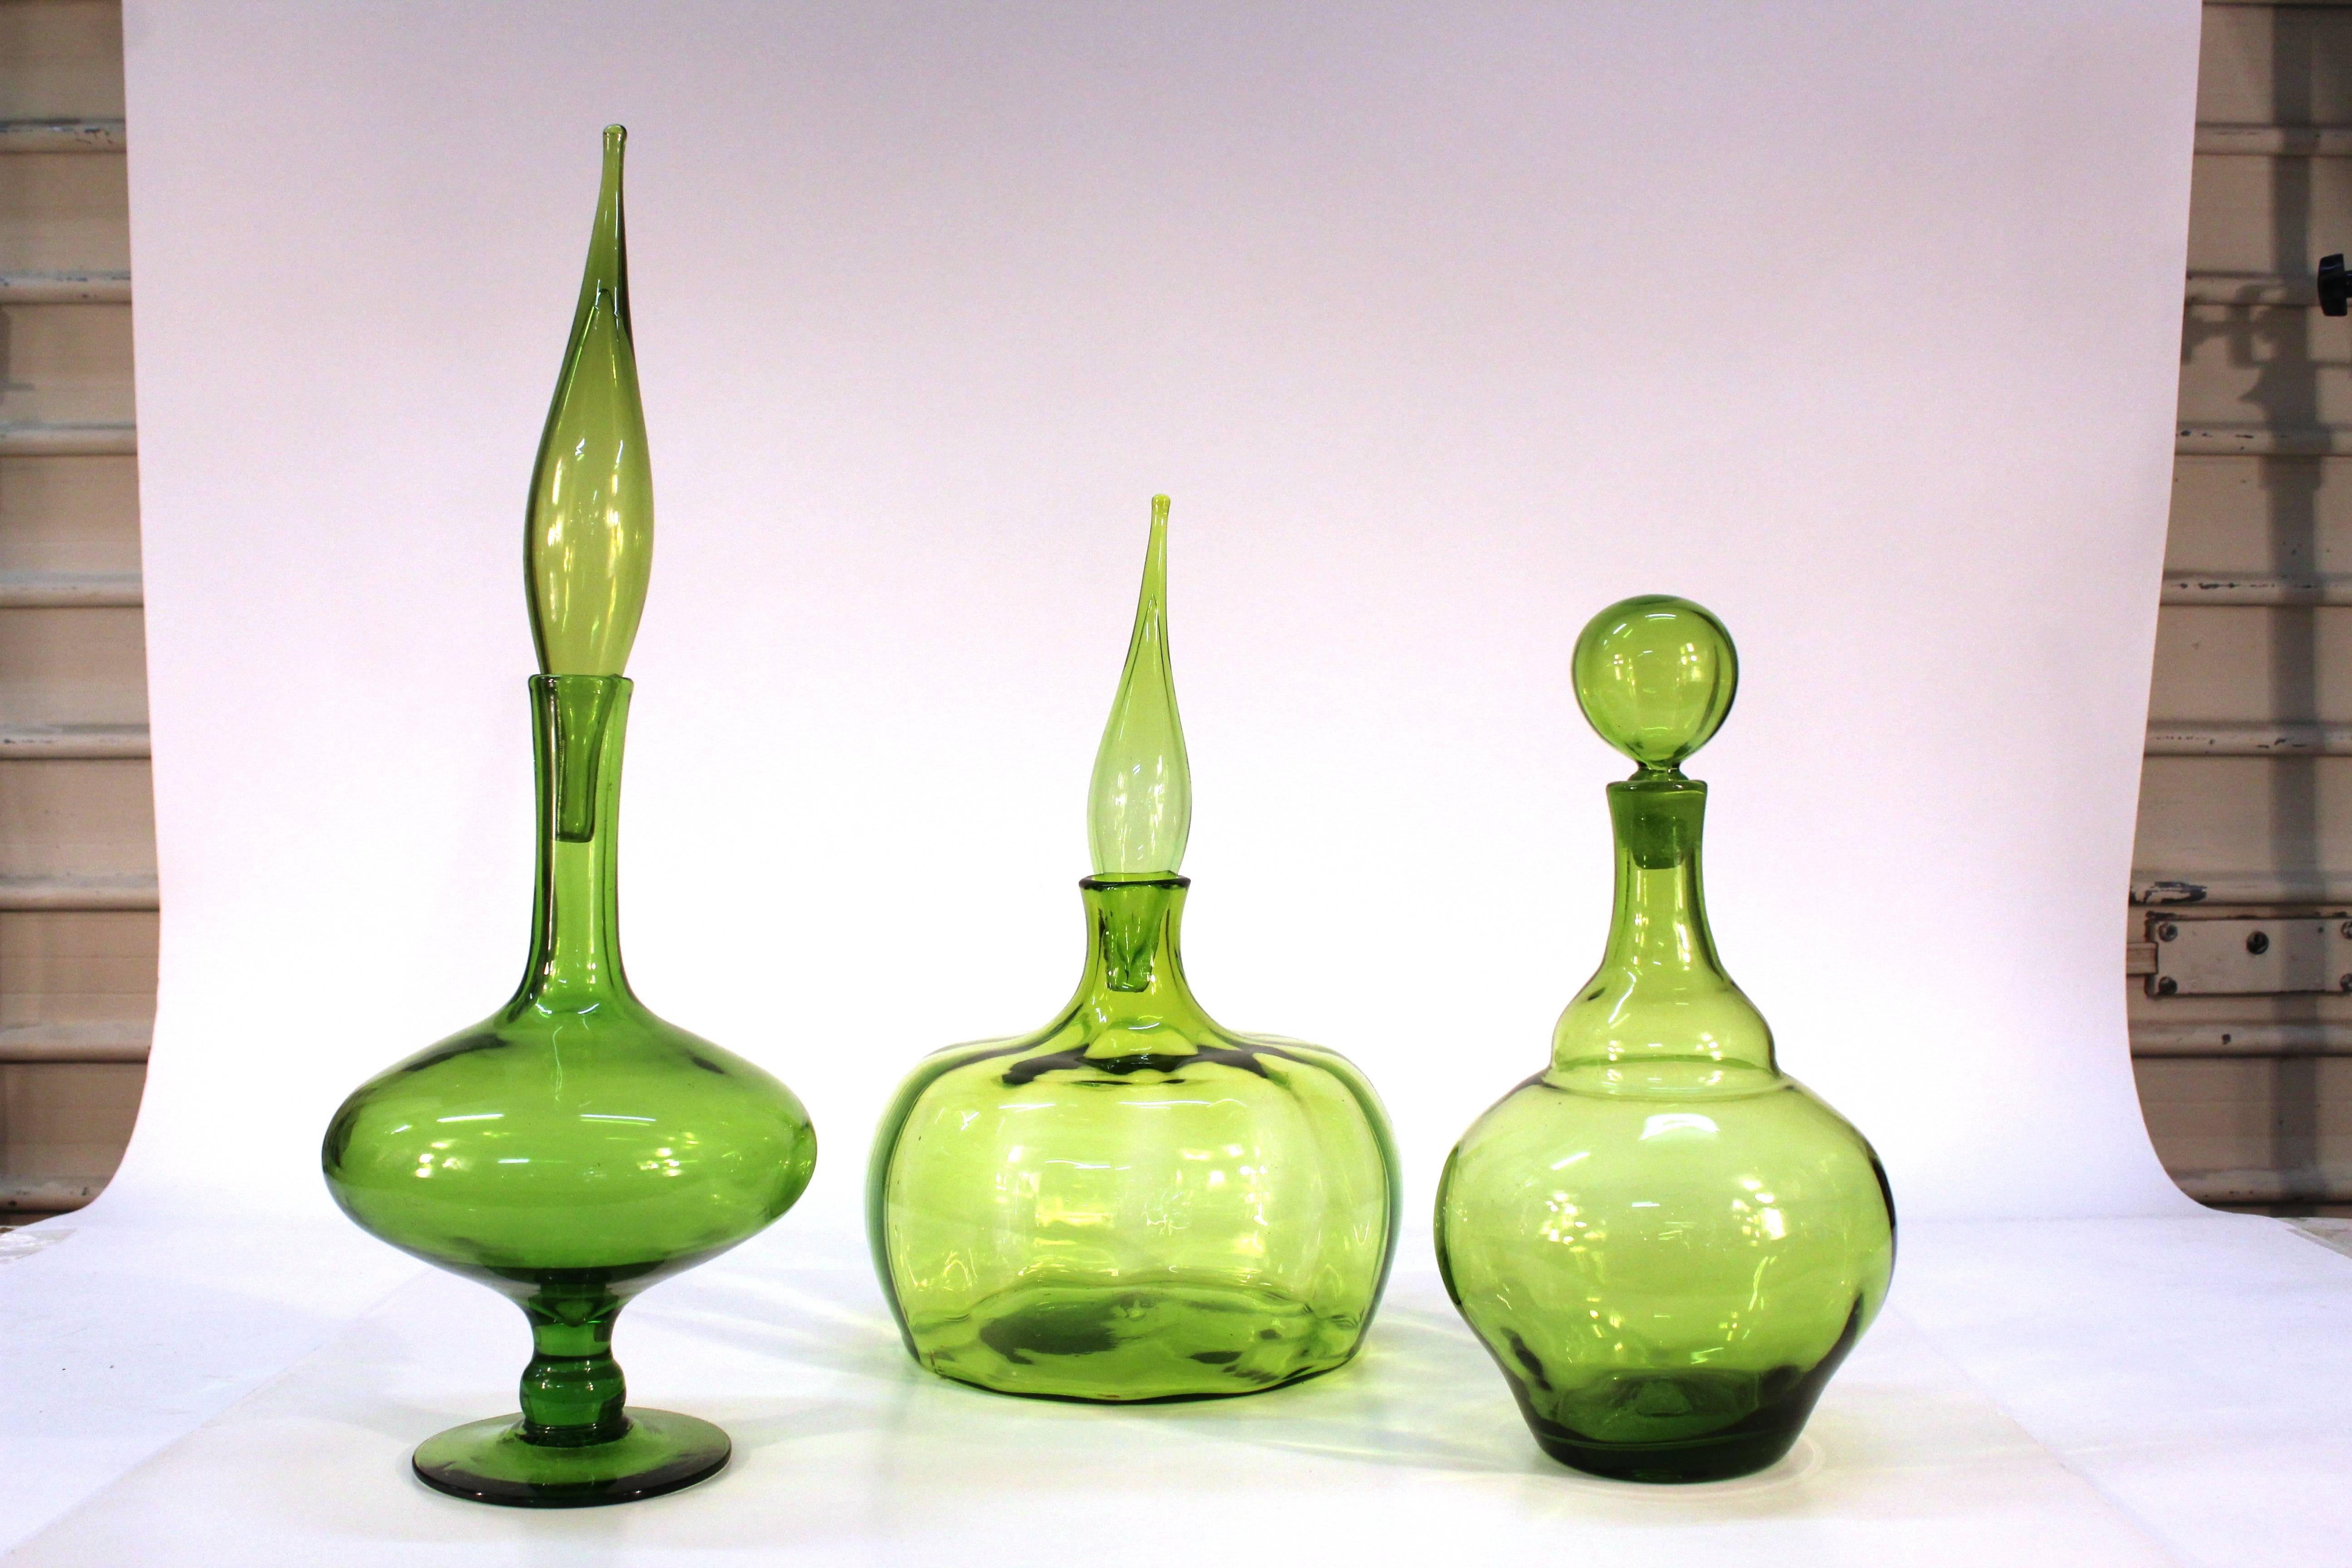 A collection of olive green glass pieces produced by the Blenko Glass Co. of Milton, West Virginia, circa 1960s. Crafted by Joel Myers and Wayne Husted. Each piece is uniquely numbered. Available as a set or individually. 

#15-03-22: Genie